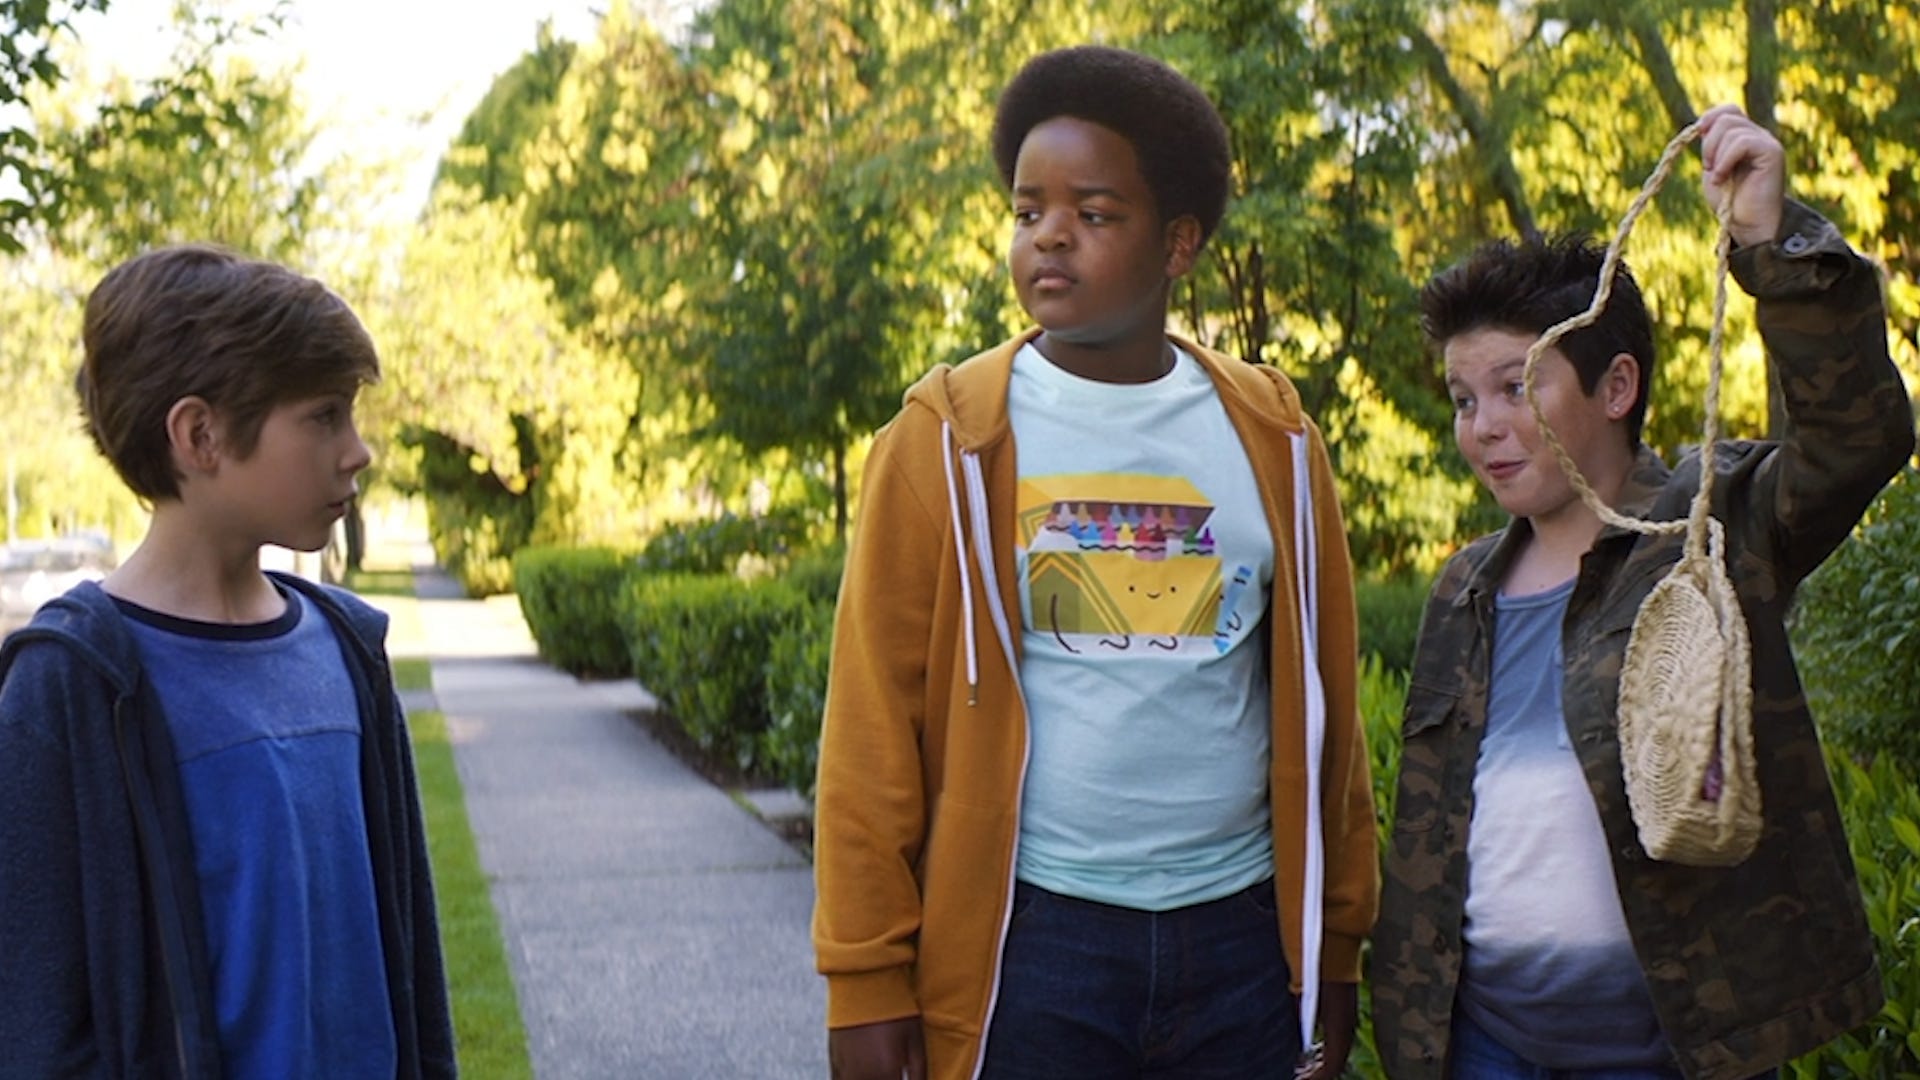 7th Grade Sex - Three boys know how to get into trouble in 'Good Boys' trailer